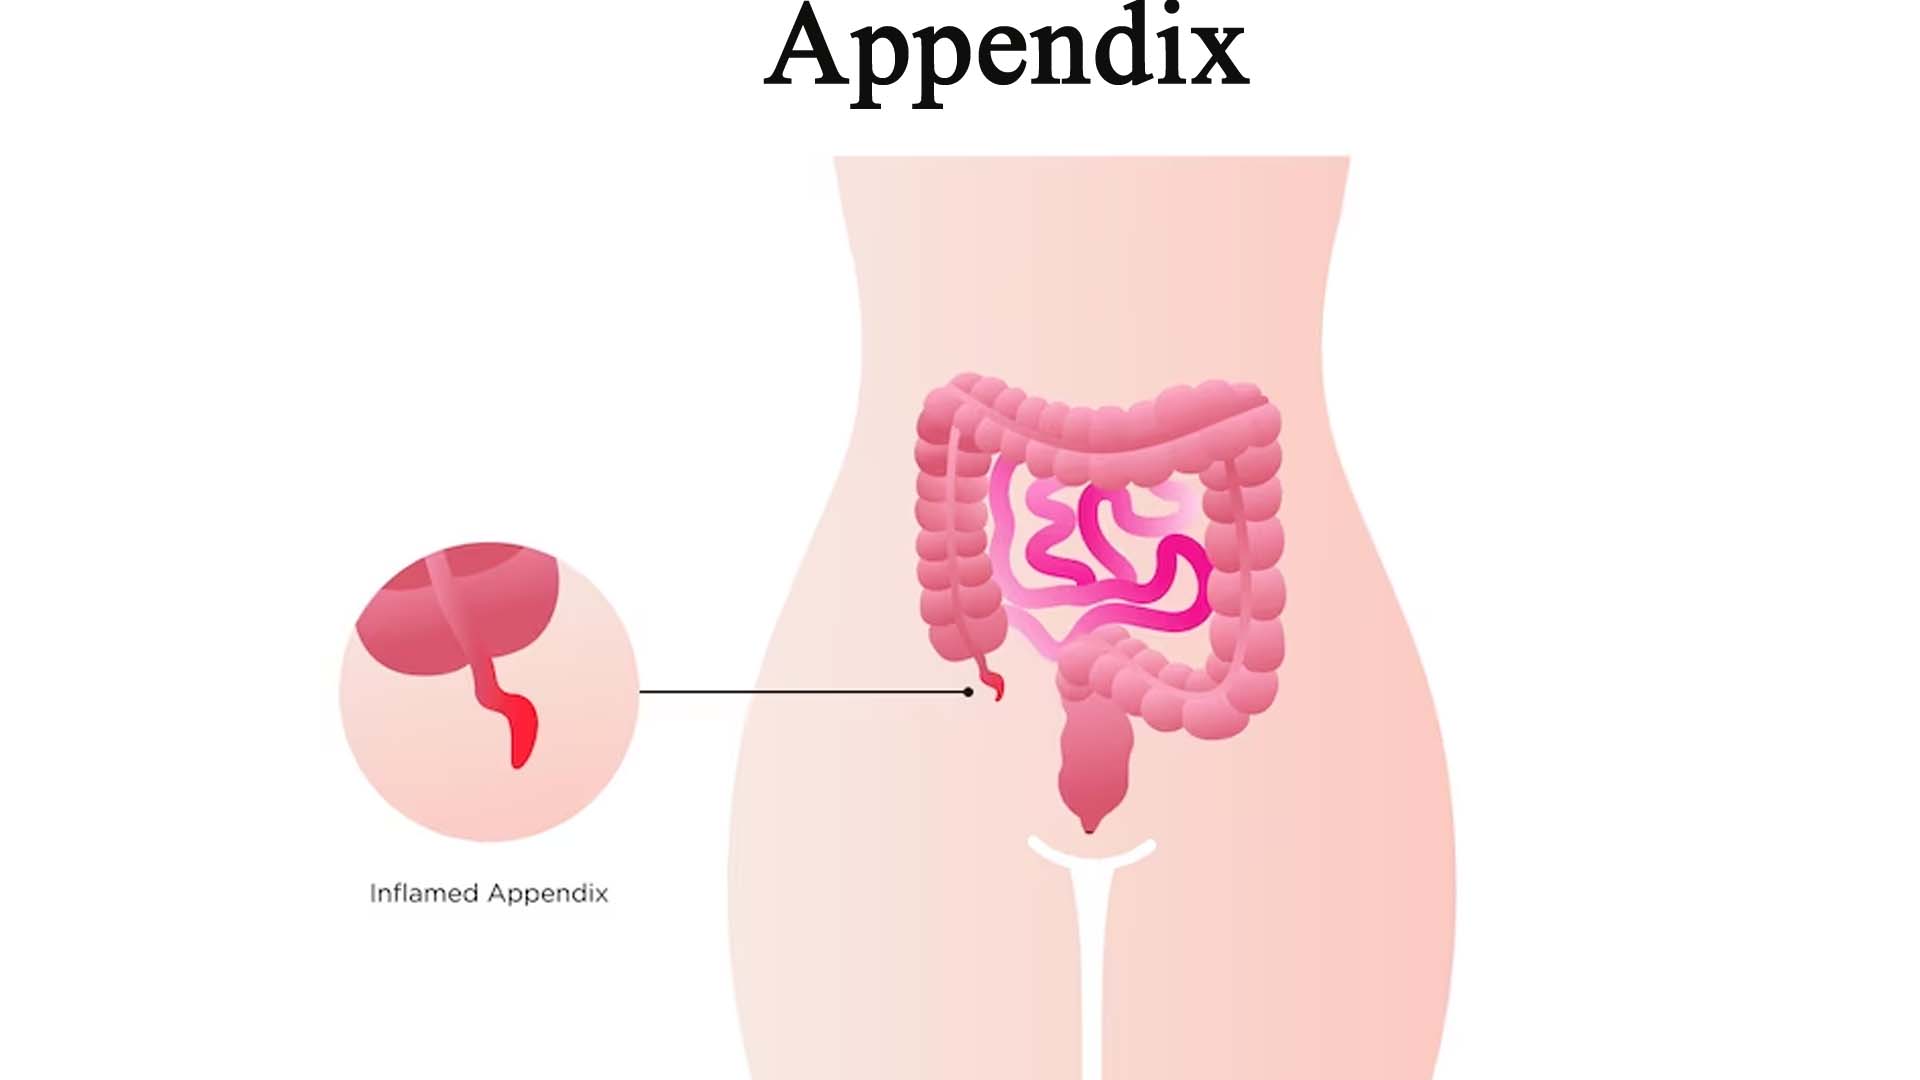 How is Appendix Caused?